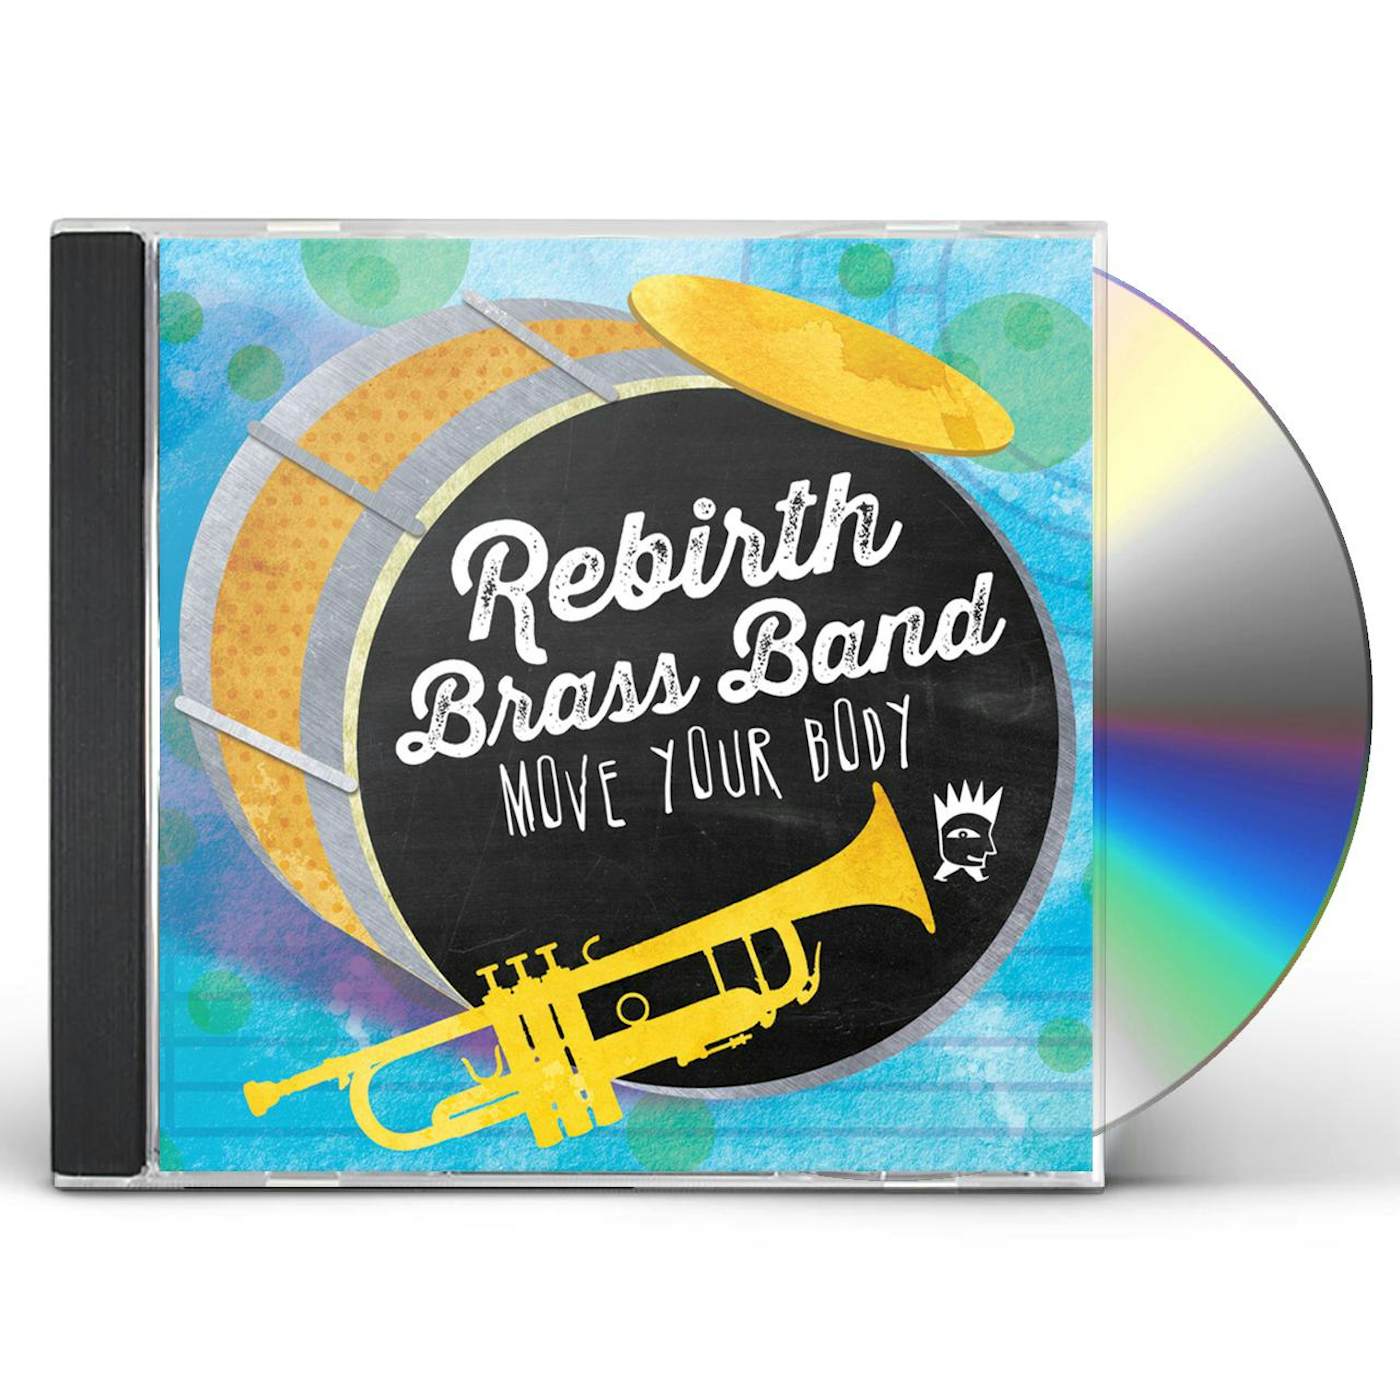 Rebirth Brass Band MOVE YOUR BODY CD